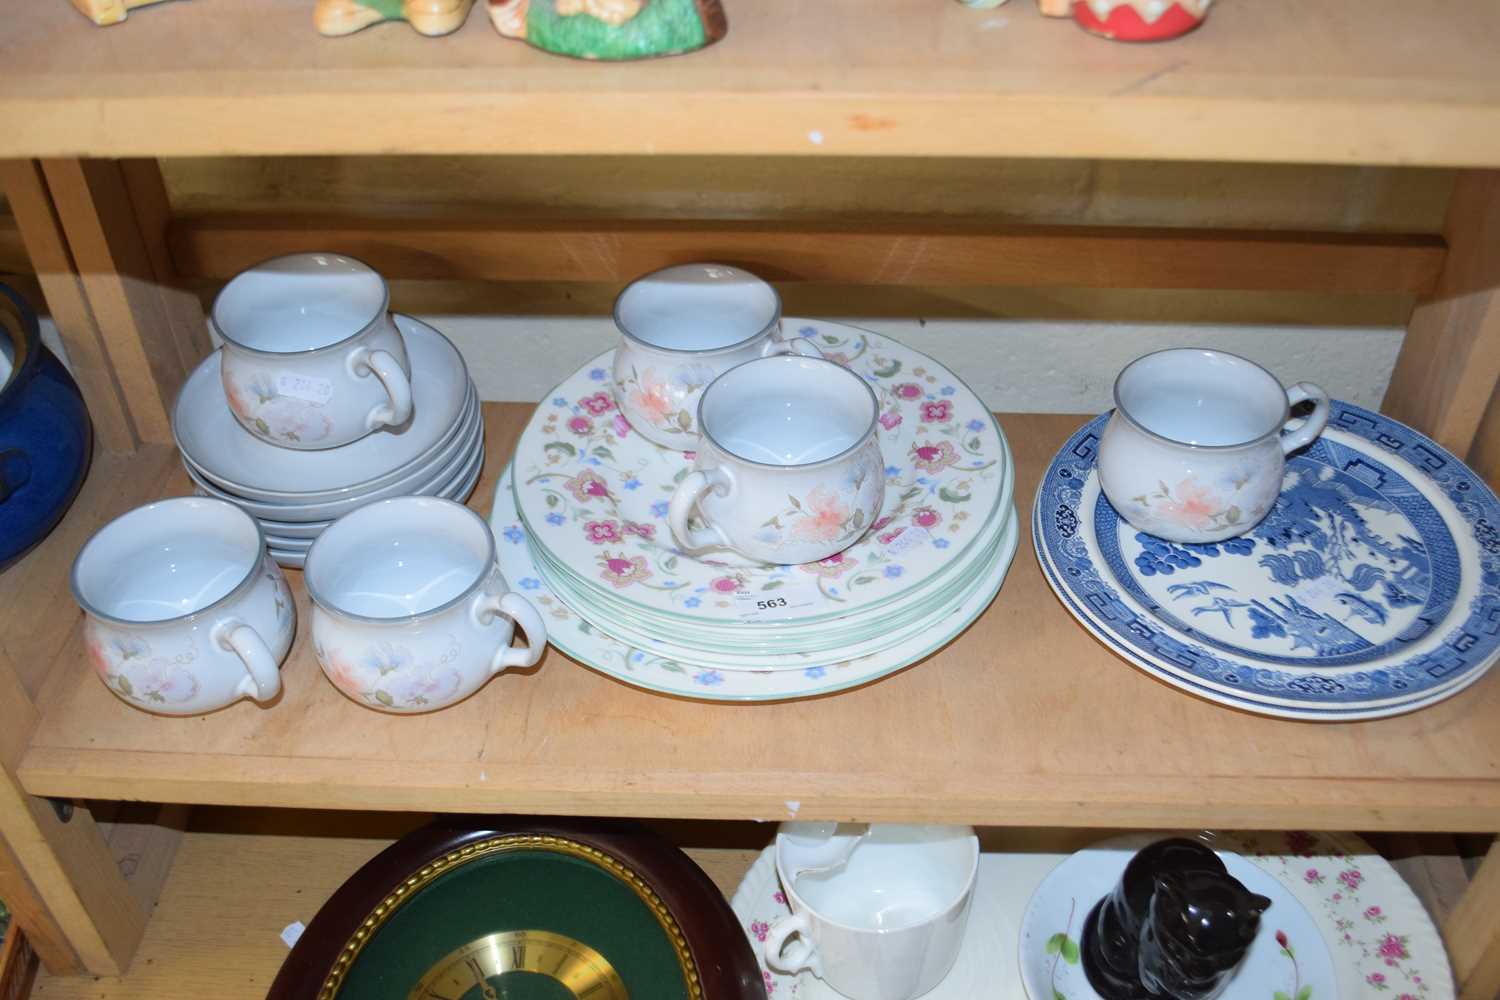 Mixed Lot: Denby floral decorated tea wares, Duchess Jacobean patterned plates and other items